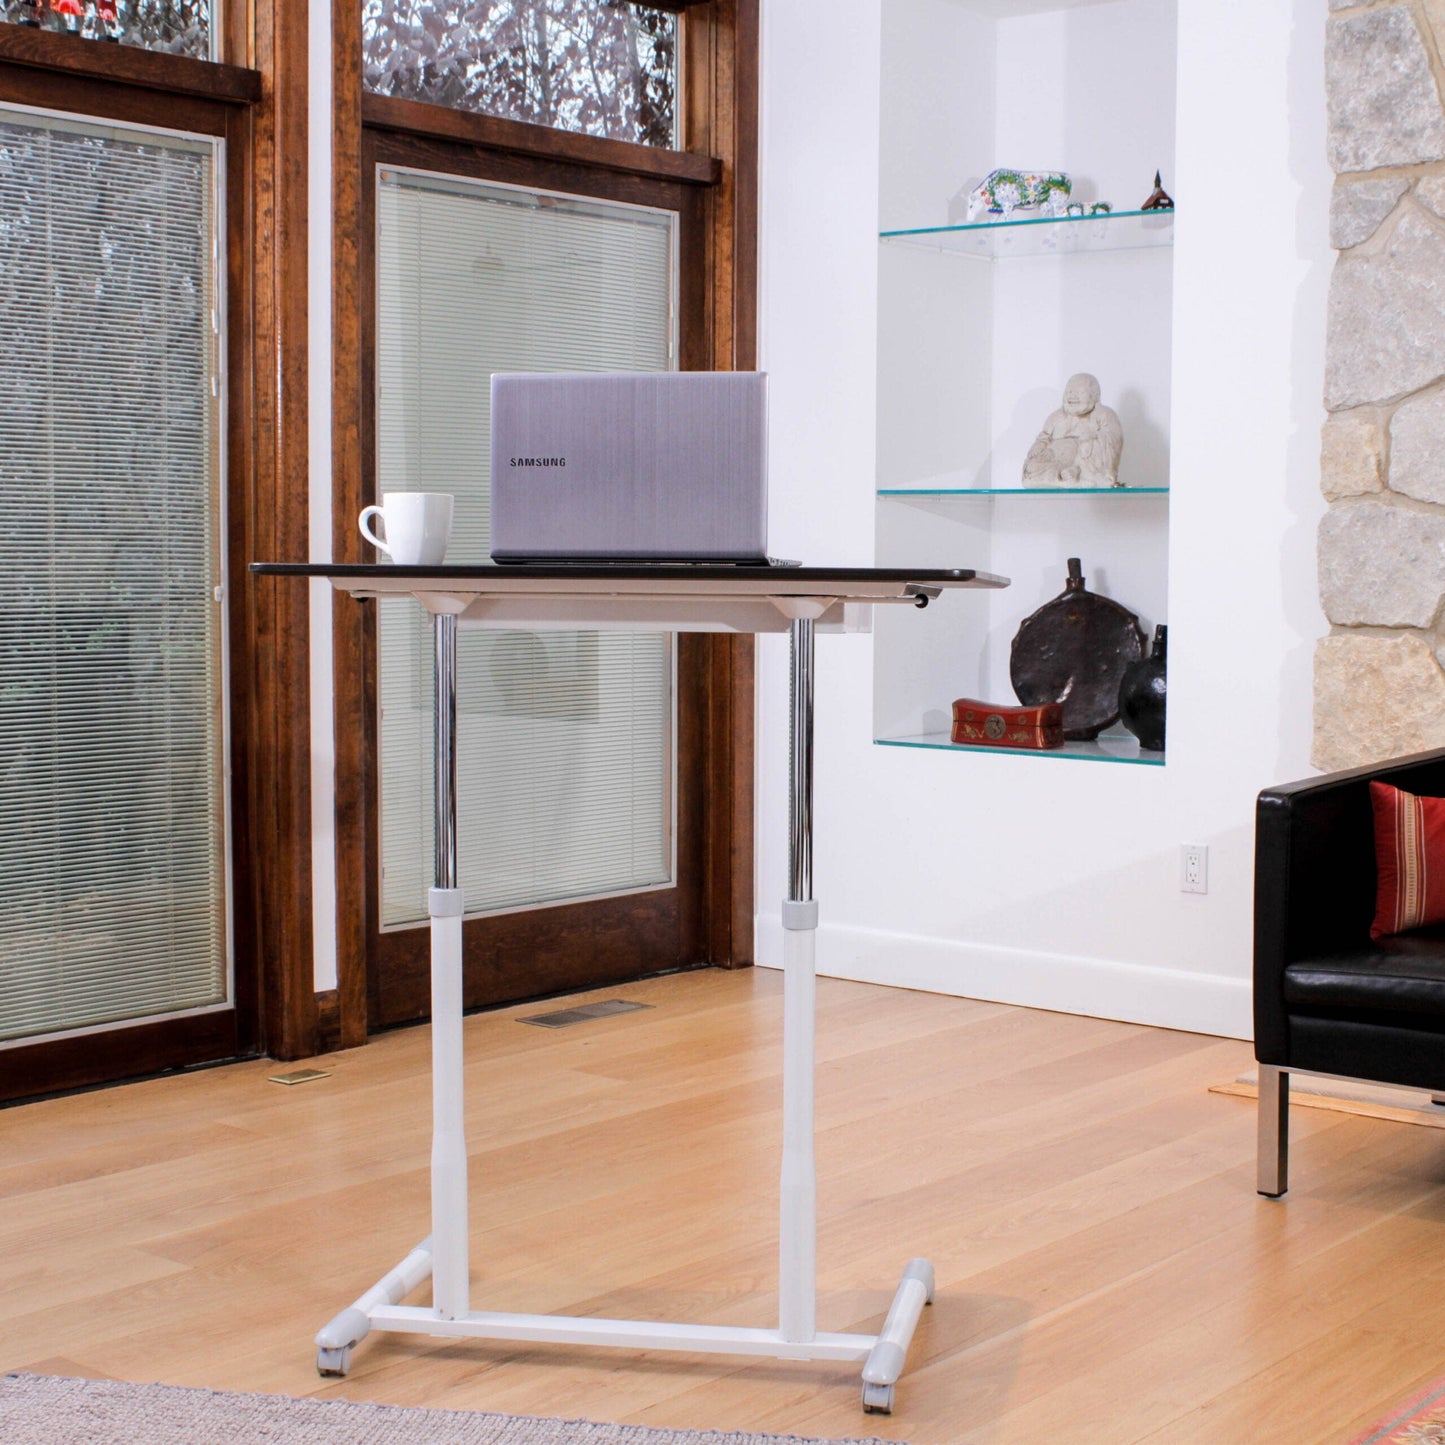 MOBILE SIT-STAND DESK WITH SILVER BASE - standupdeskdepot.com